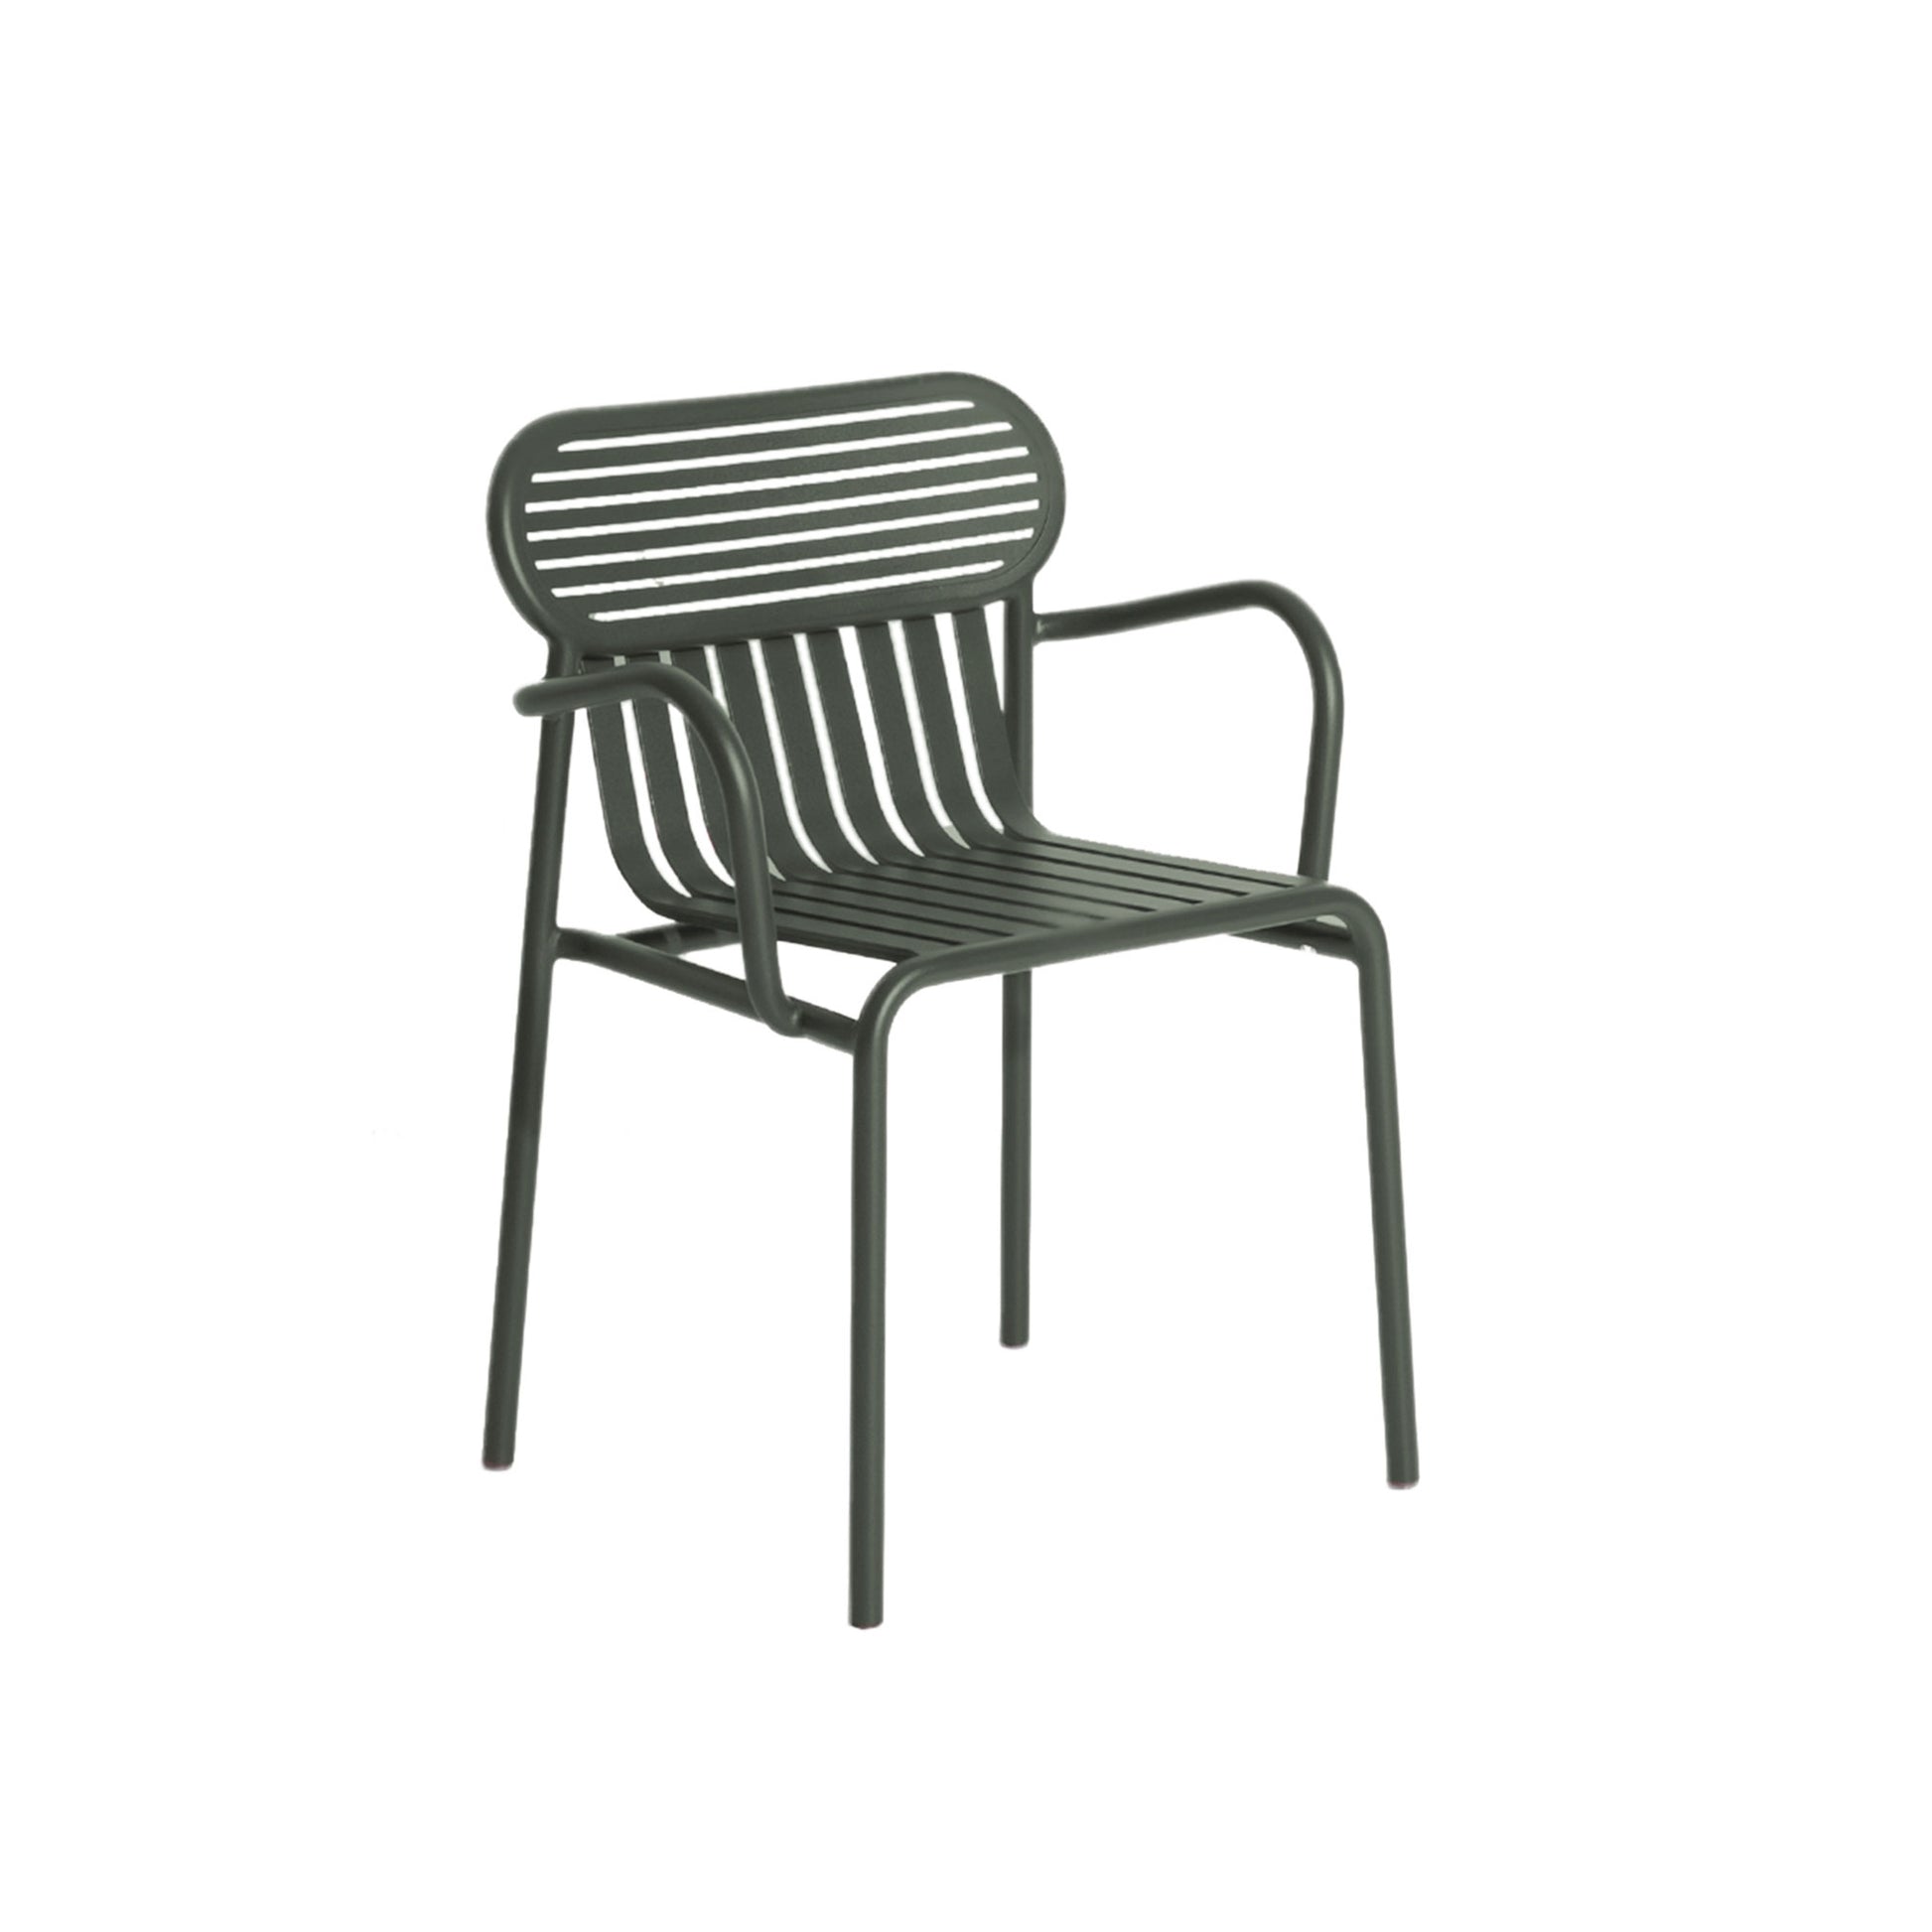 WEEK-END Dining Chair with Armrests by Petite Friture #Glass Green